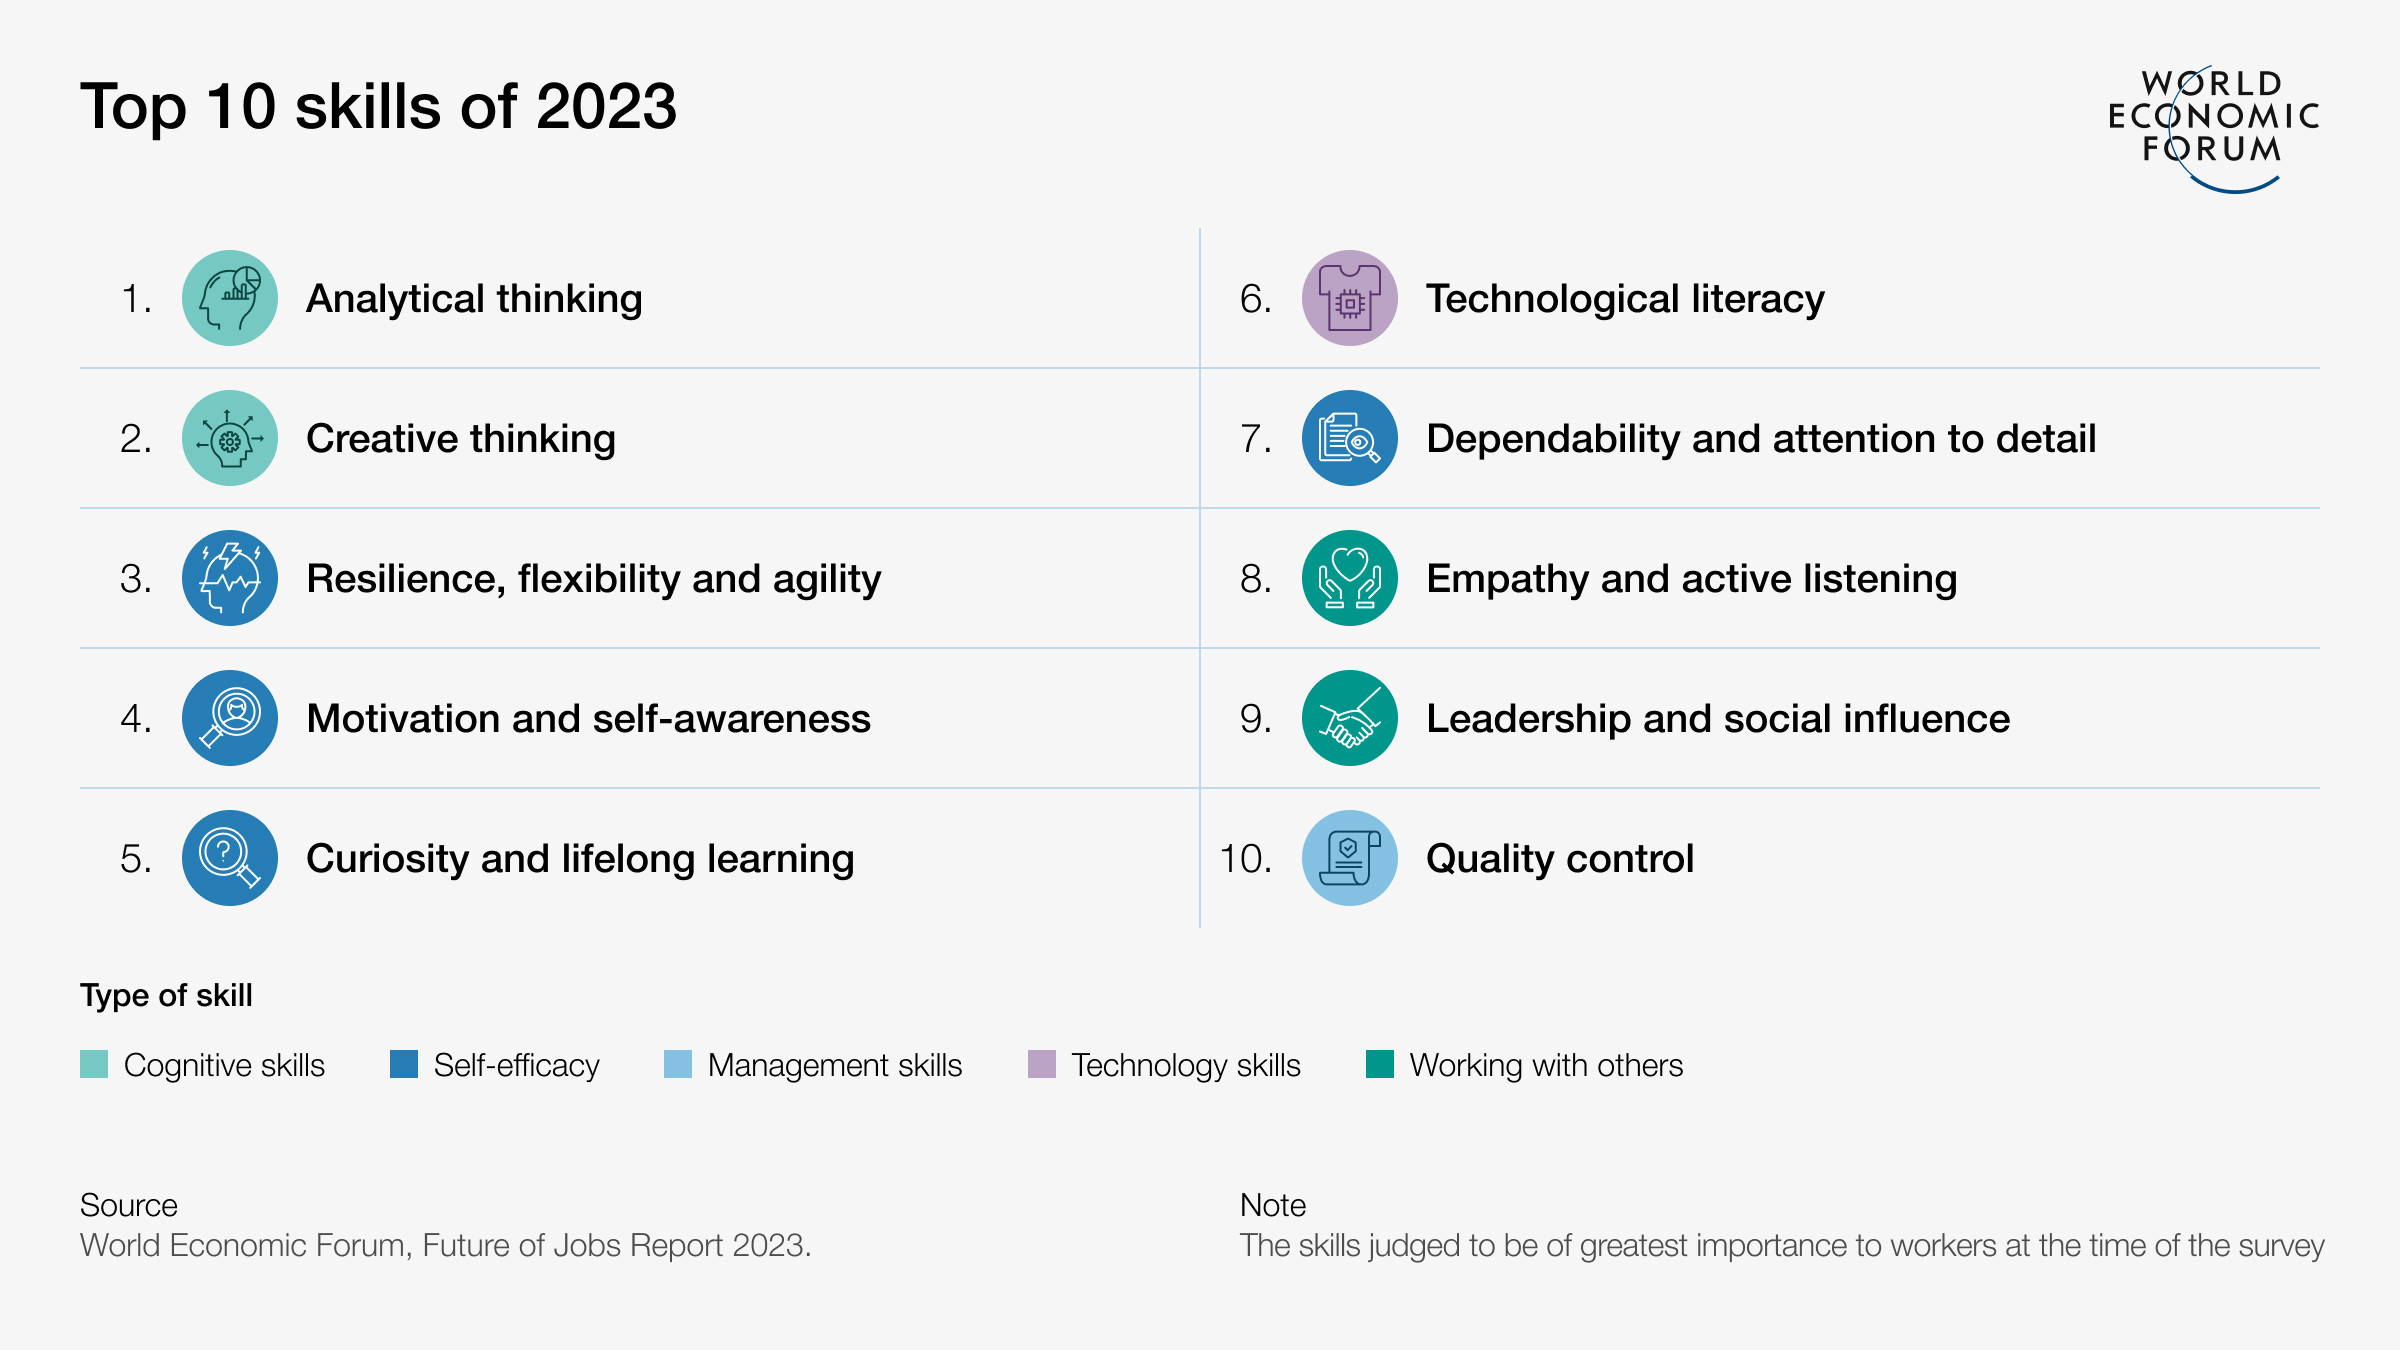 List of the top 10 skills of 2023 as published by the World Economic Forum